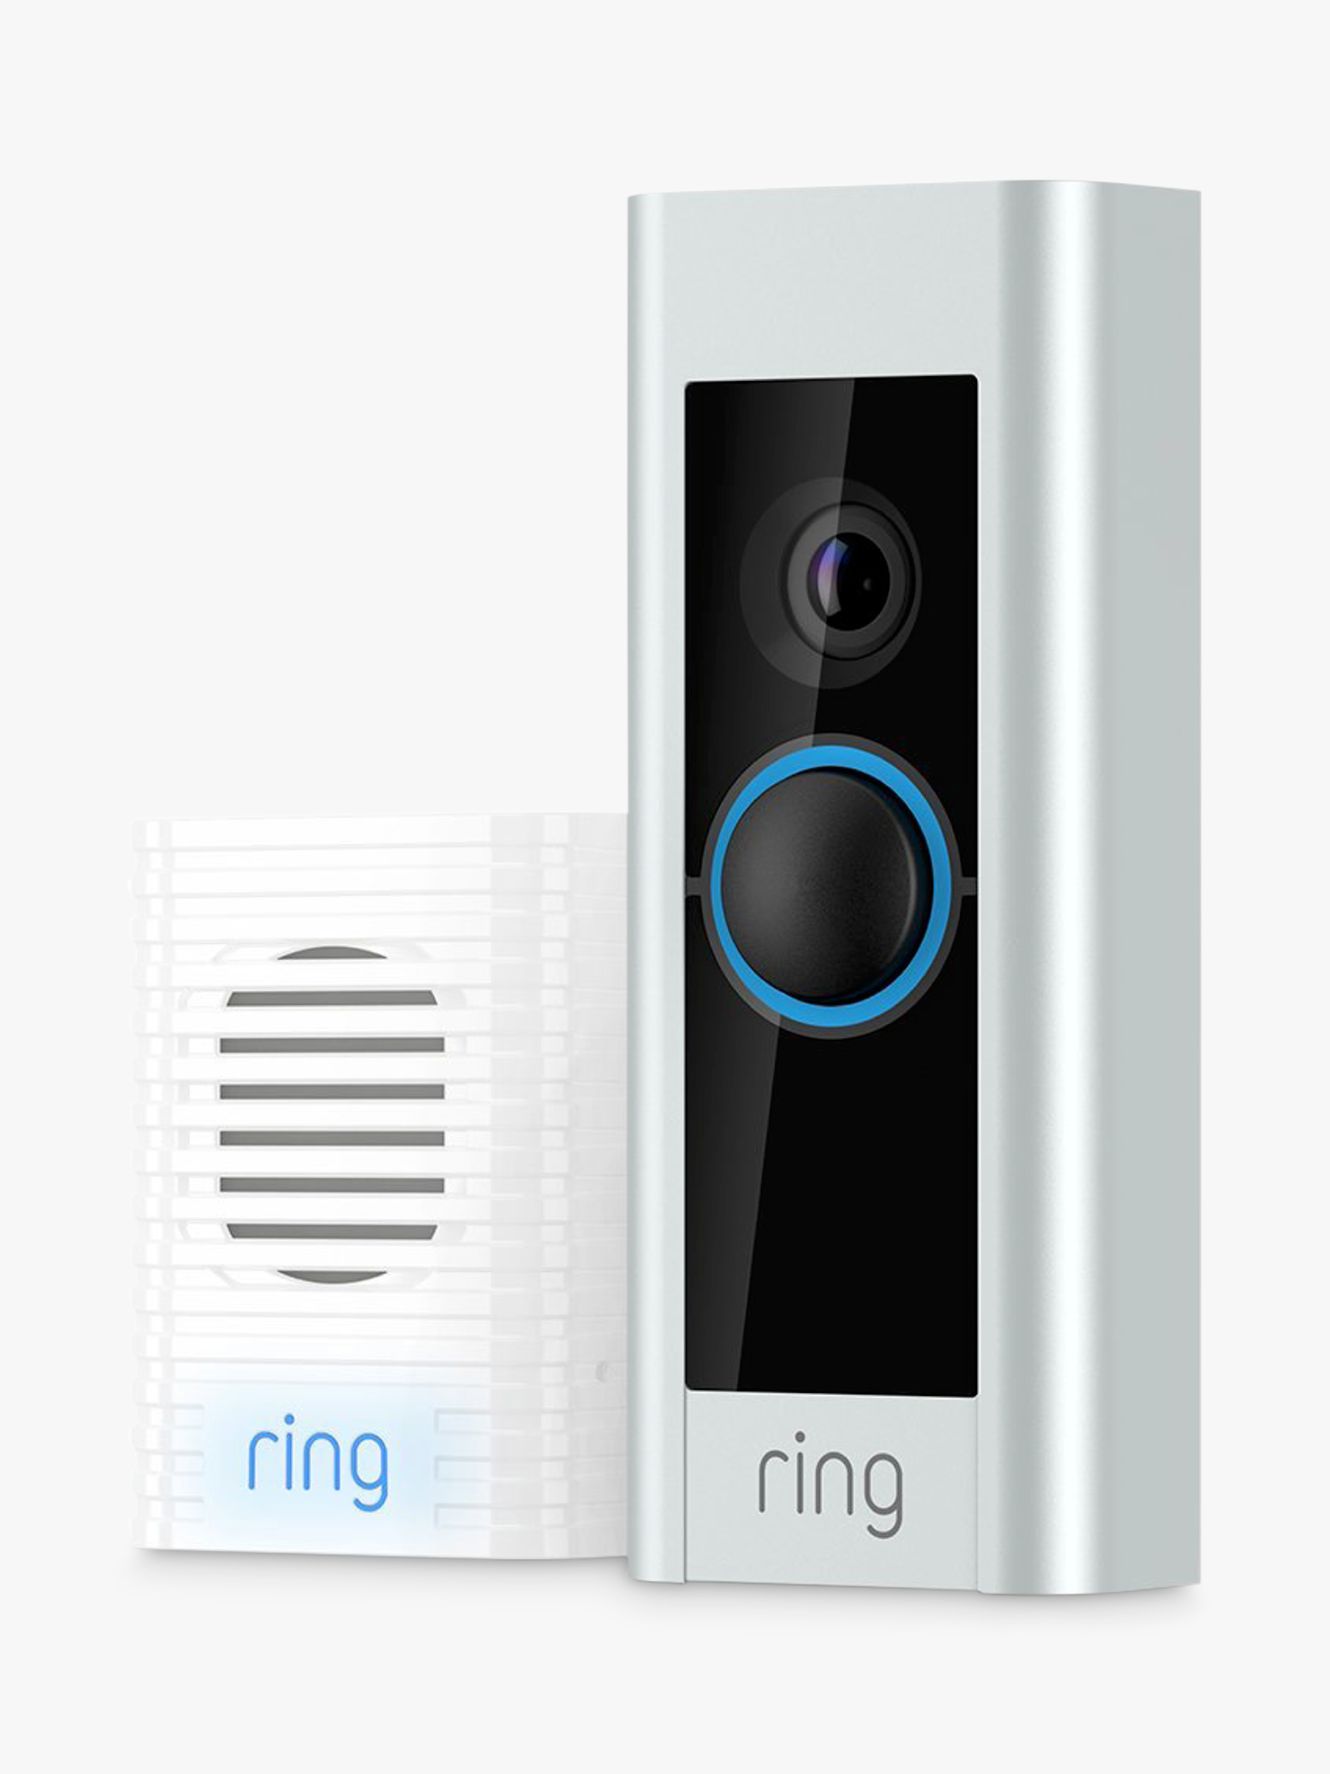 Ring Smart Video Doorbell Pro (Hardwired) with Built-in Wi-Fi & Camera